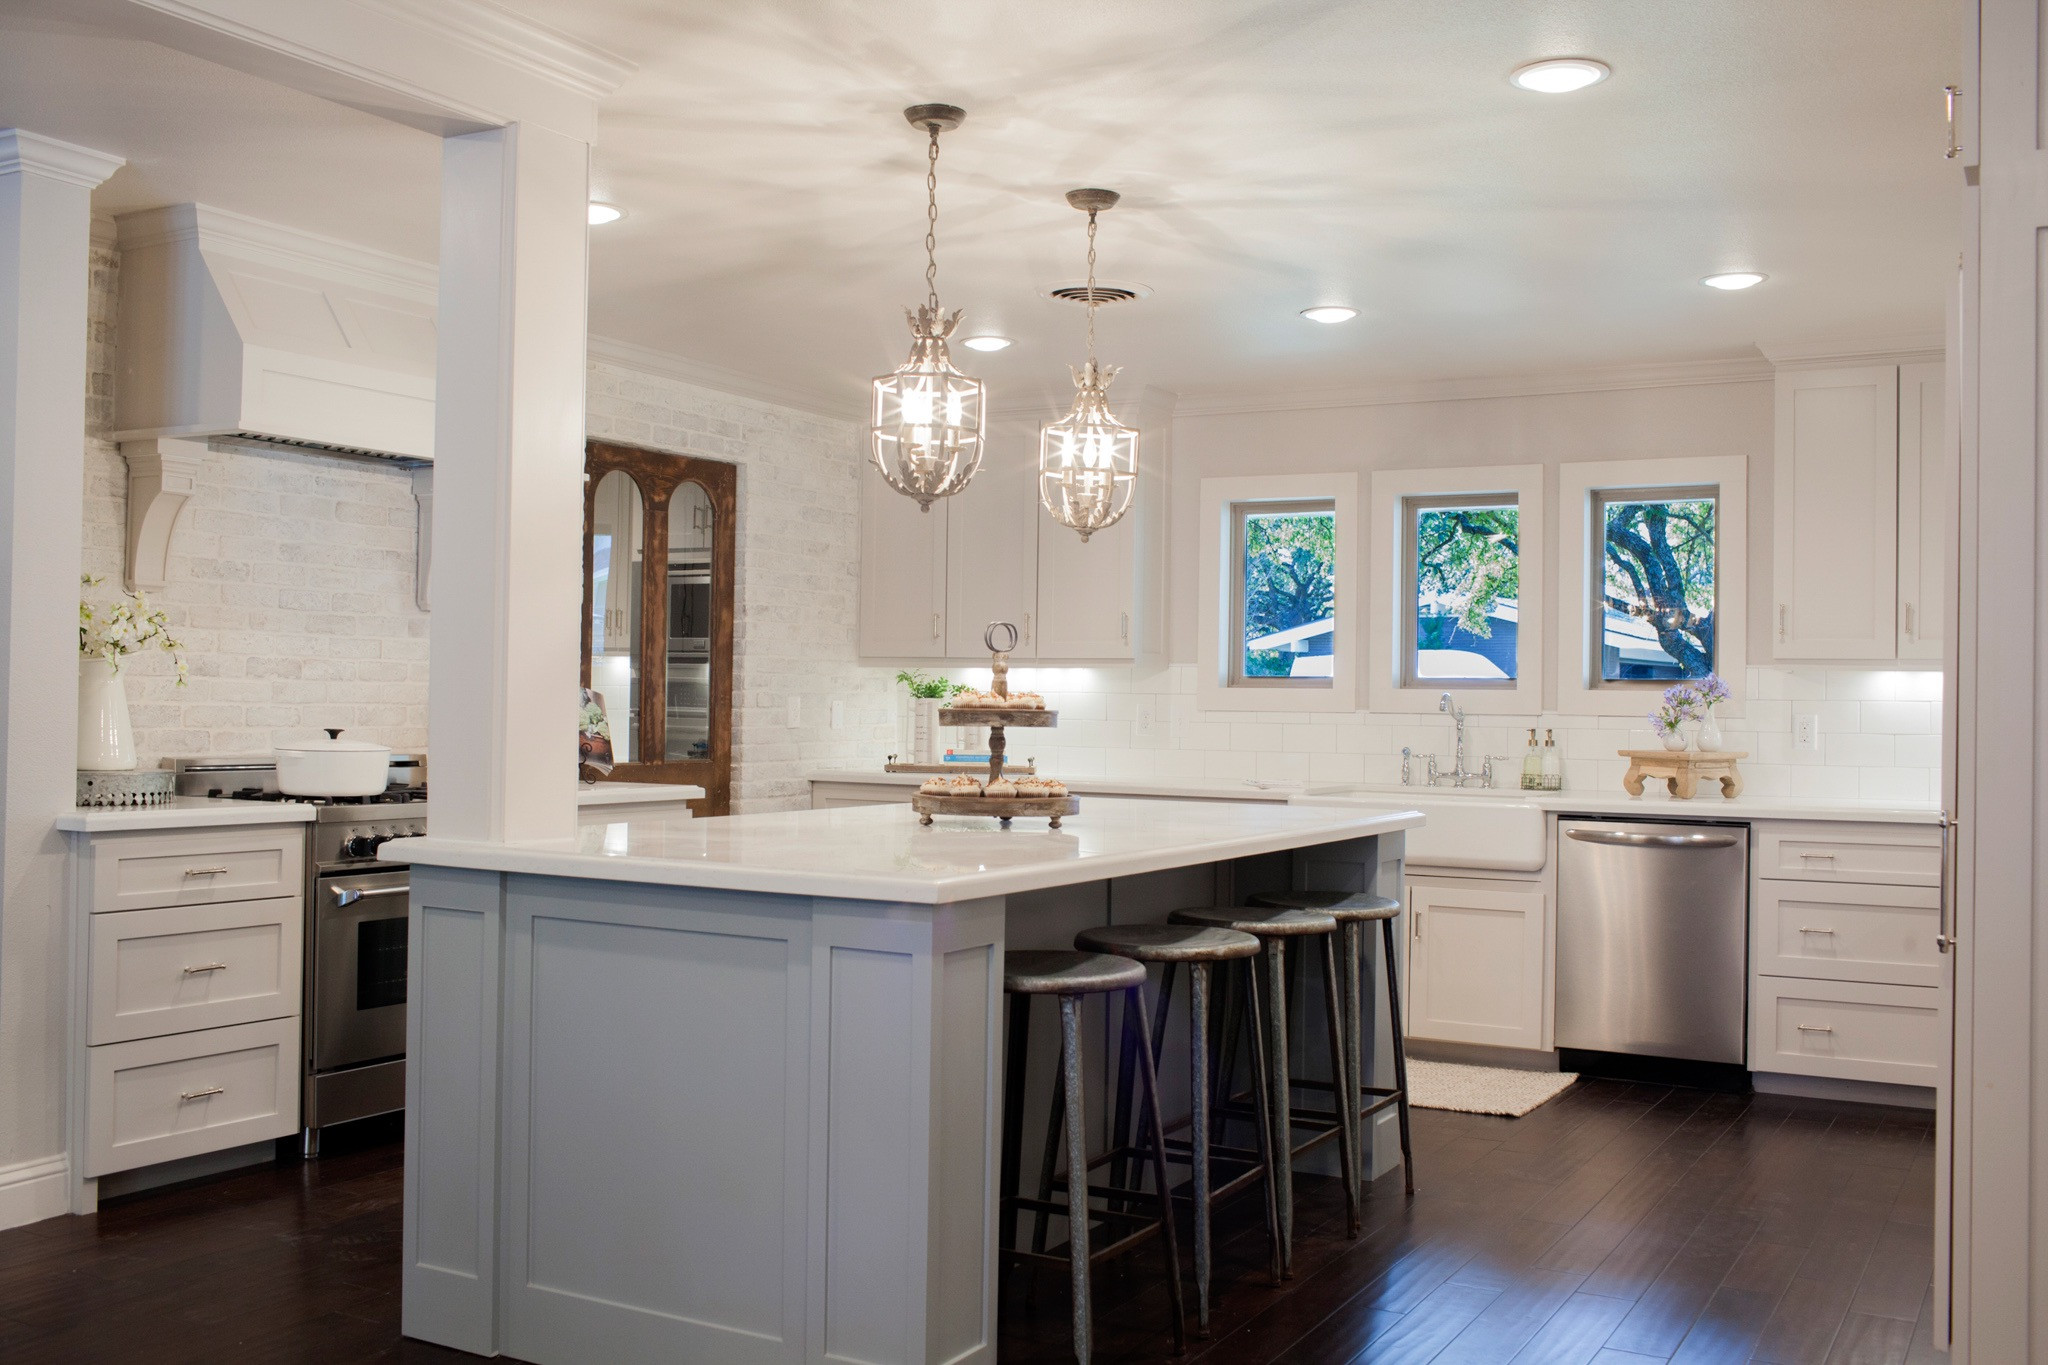 French Country Kitchen Pendant Lighting
 Various Kitchen Lighting Fixtures & Ideas